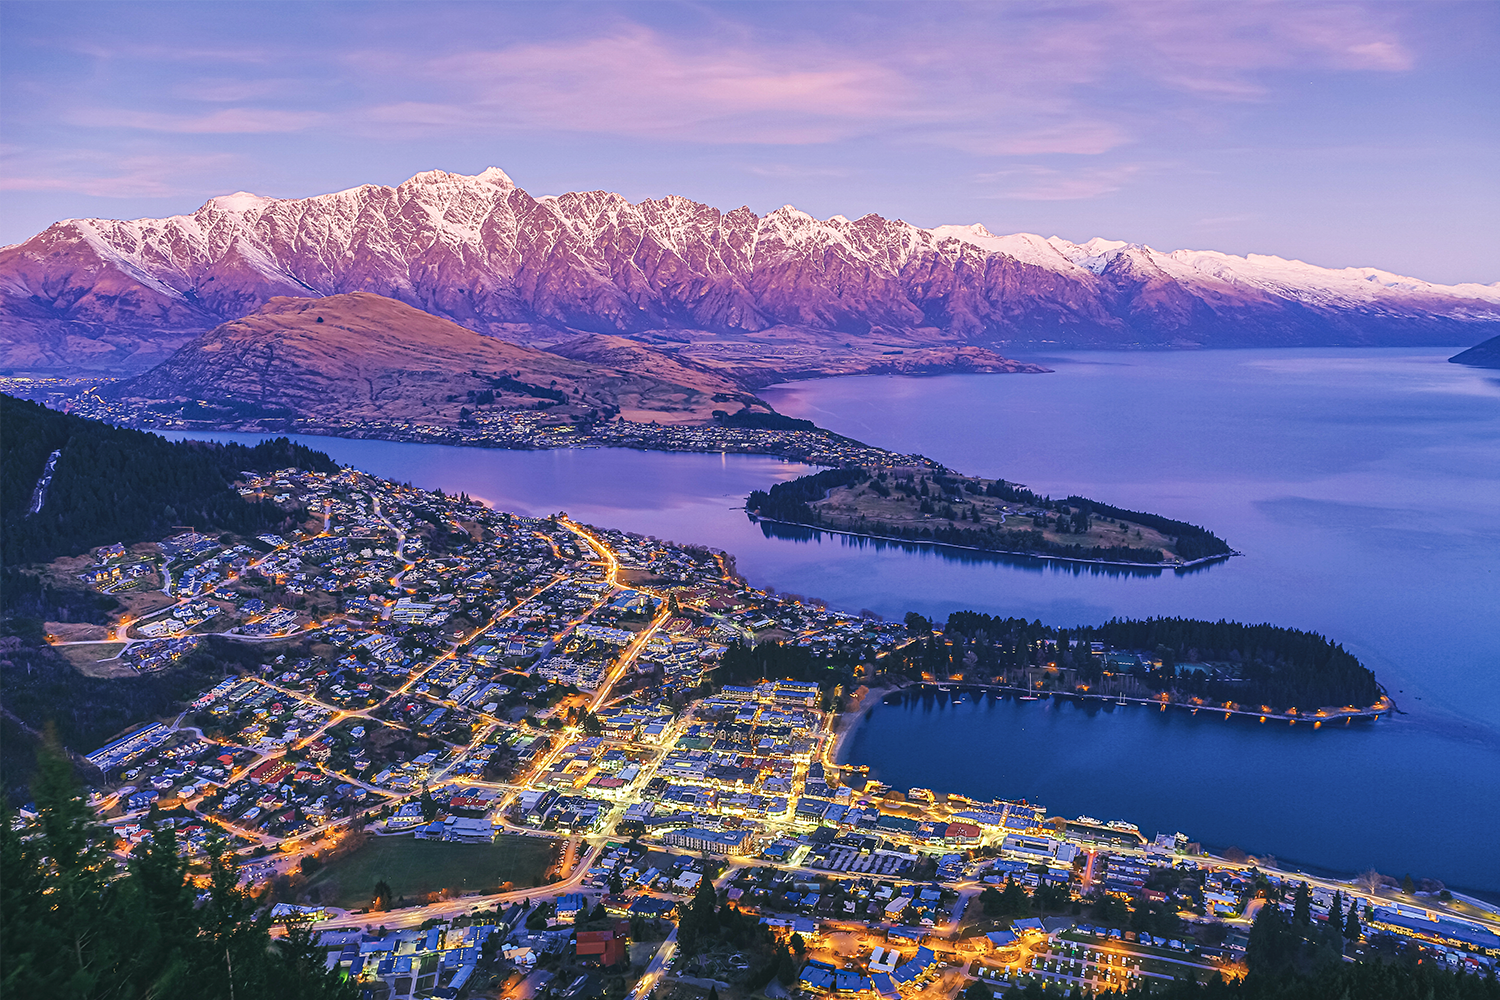 Aerial View of Queenstown at Dusk with Lake Wakatipu and The Remarkables, New Zealand